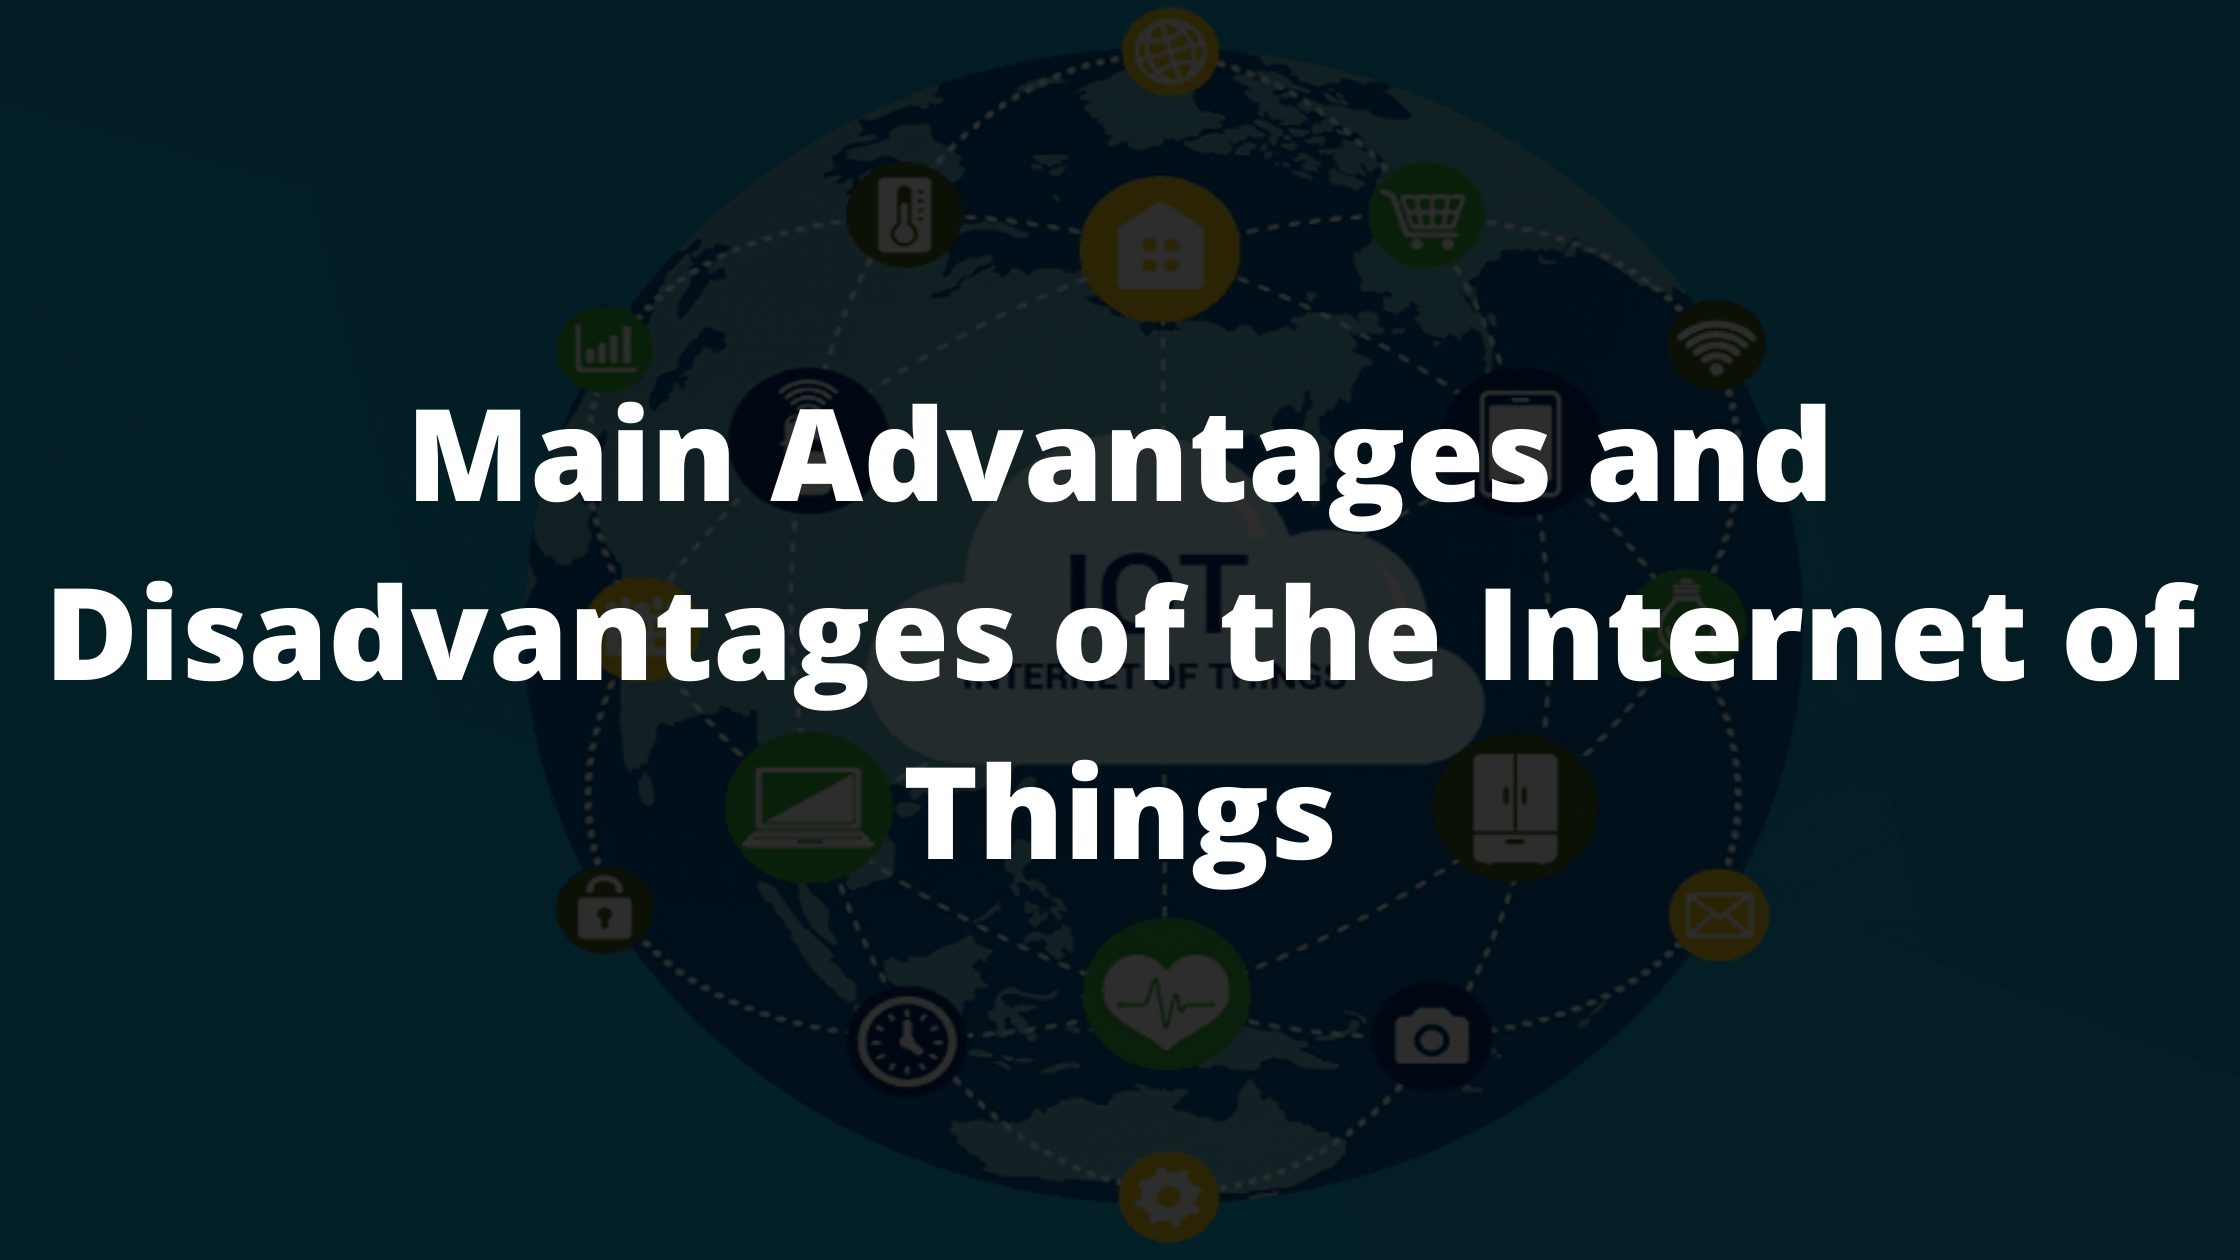 Main Advantages and Disadvantages of the Internet of Things